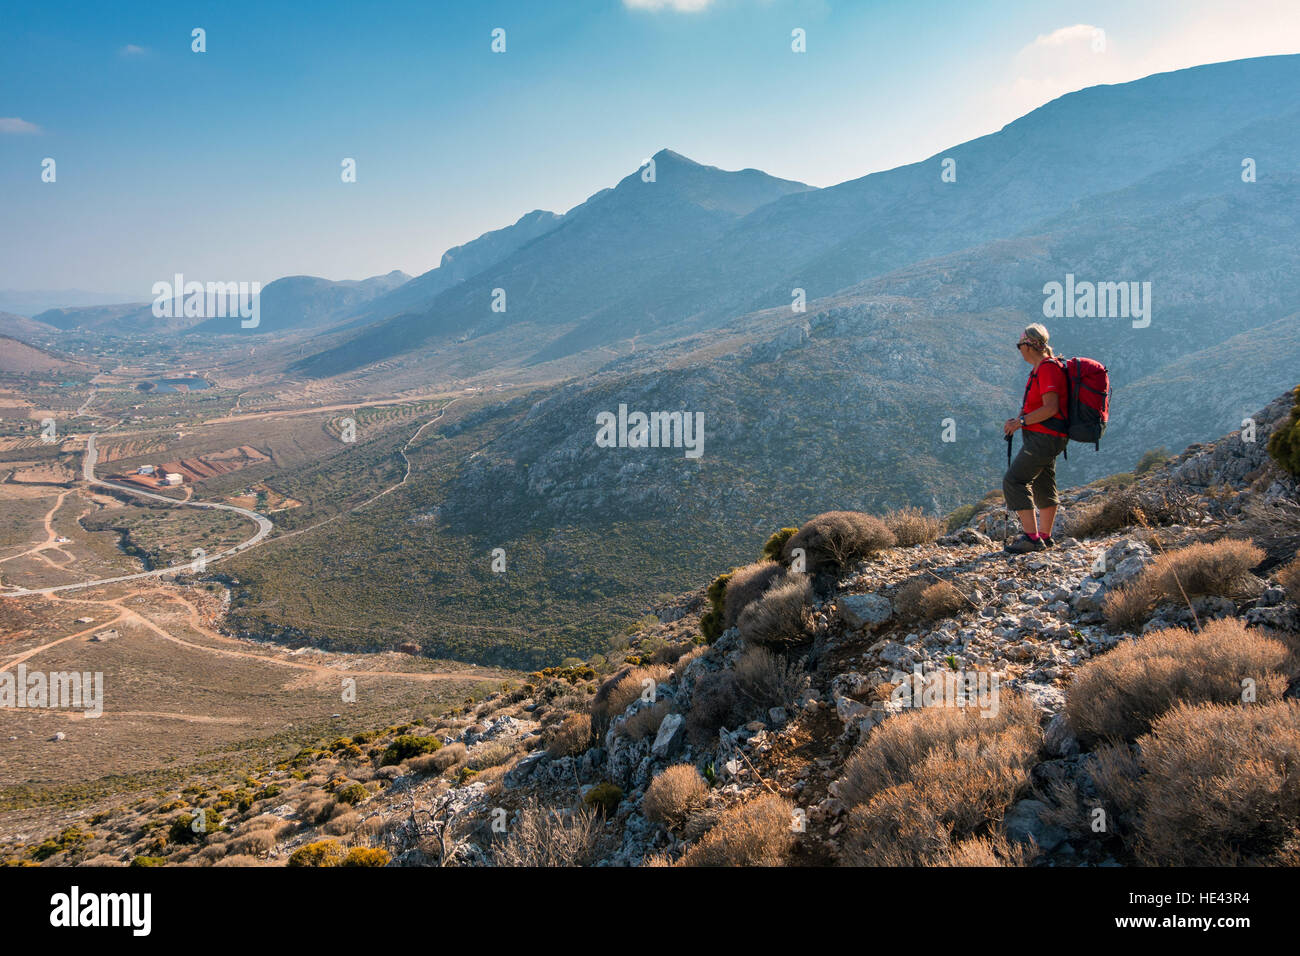 Female figure in red with rucksack  in mountains of Kalymnos, Greece Stock Photo